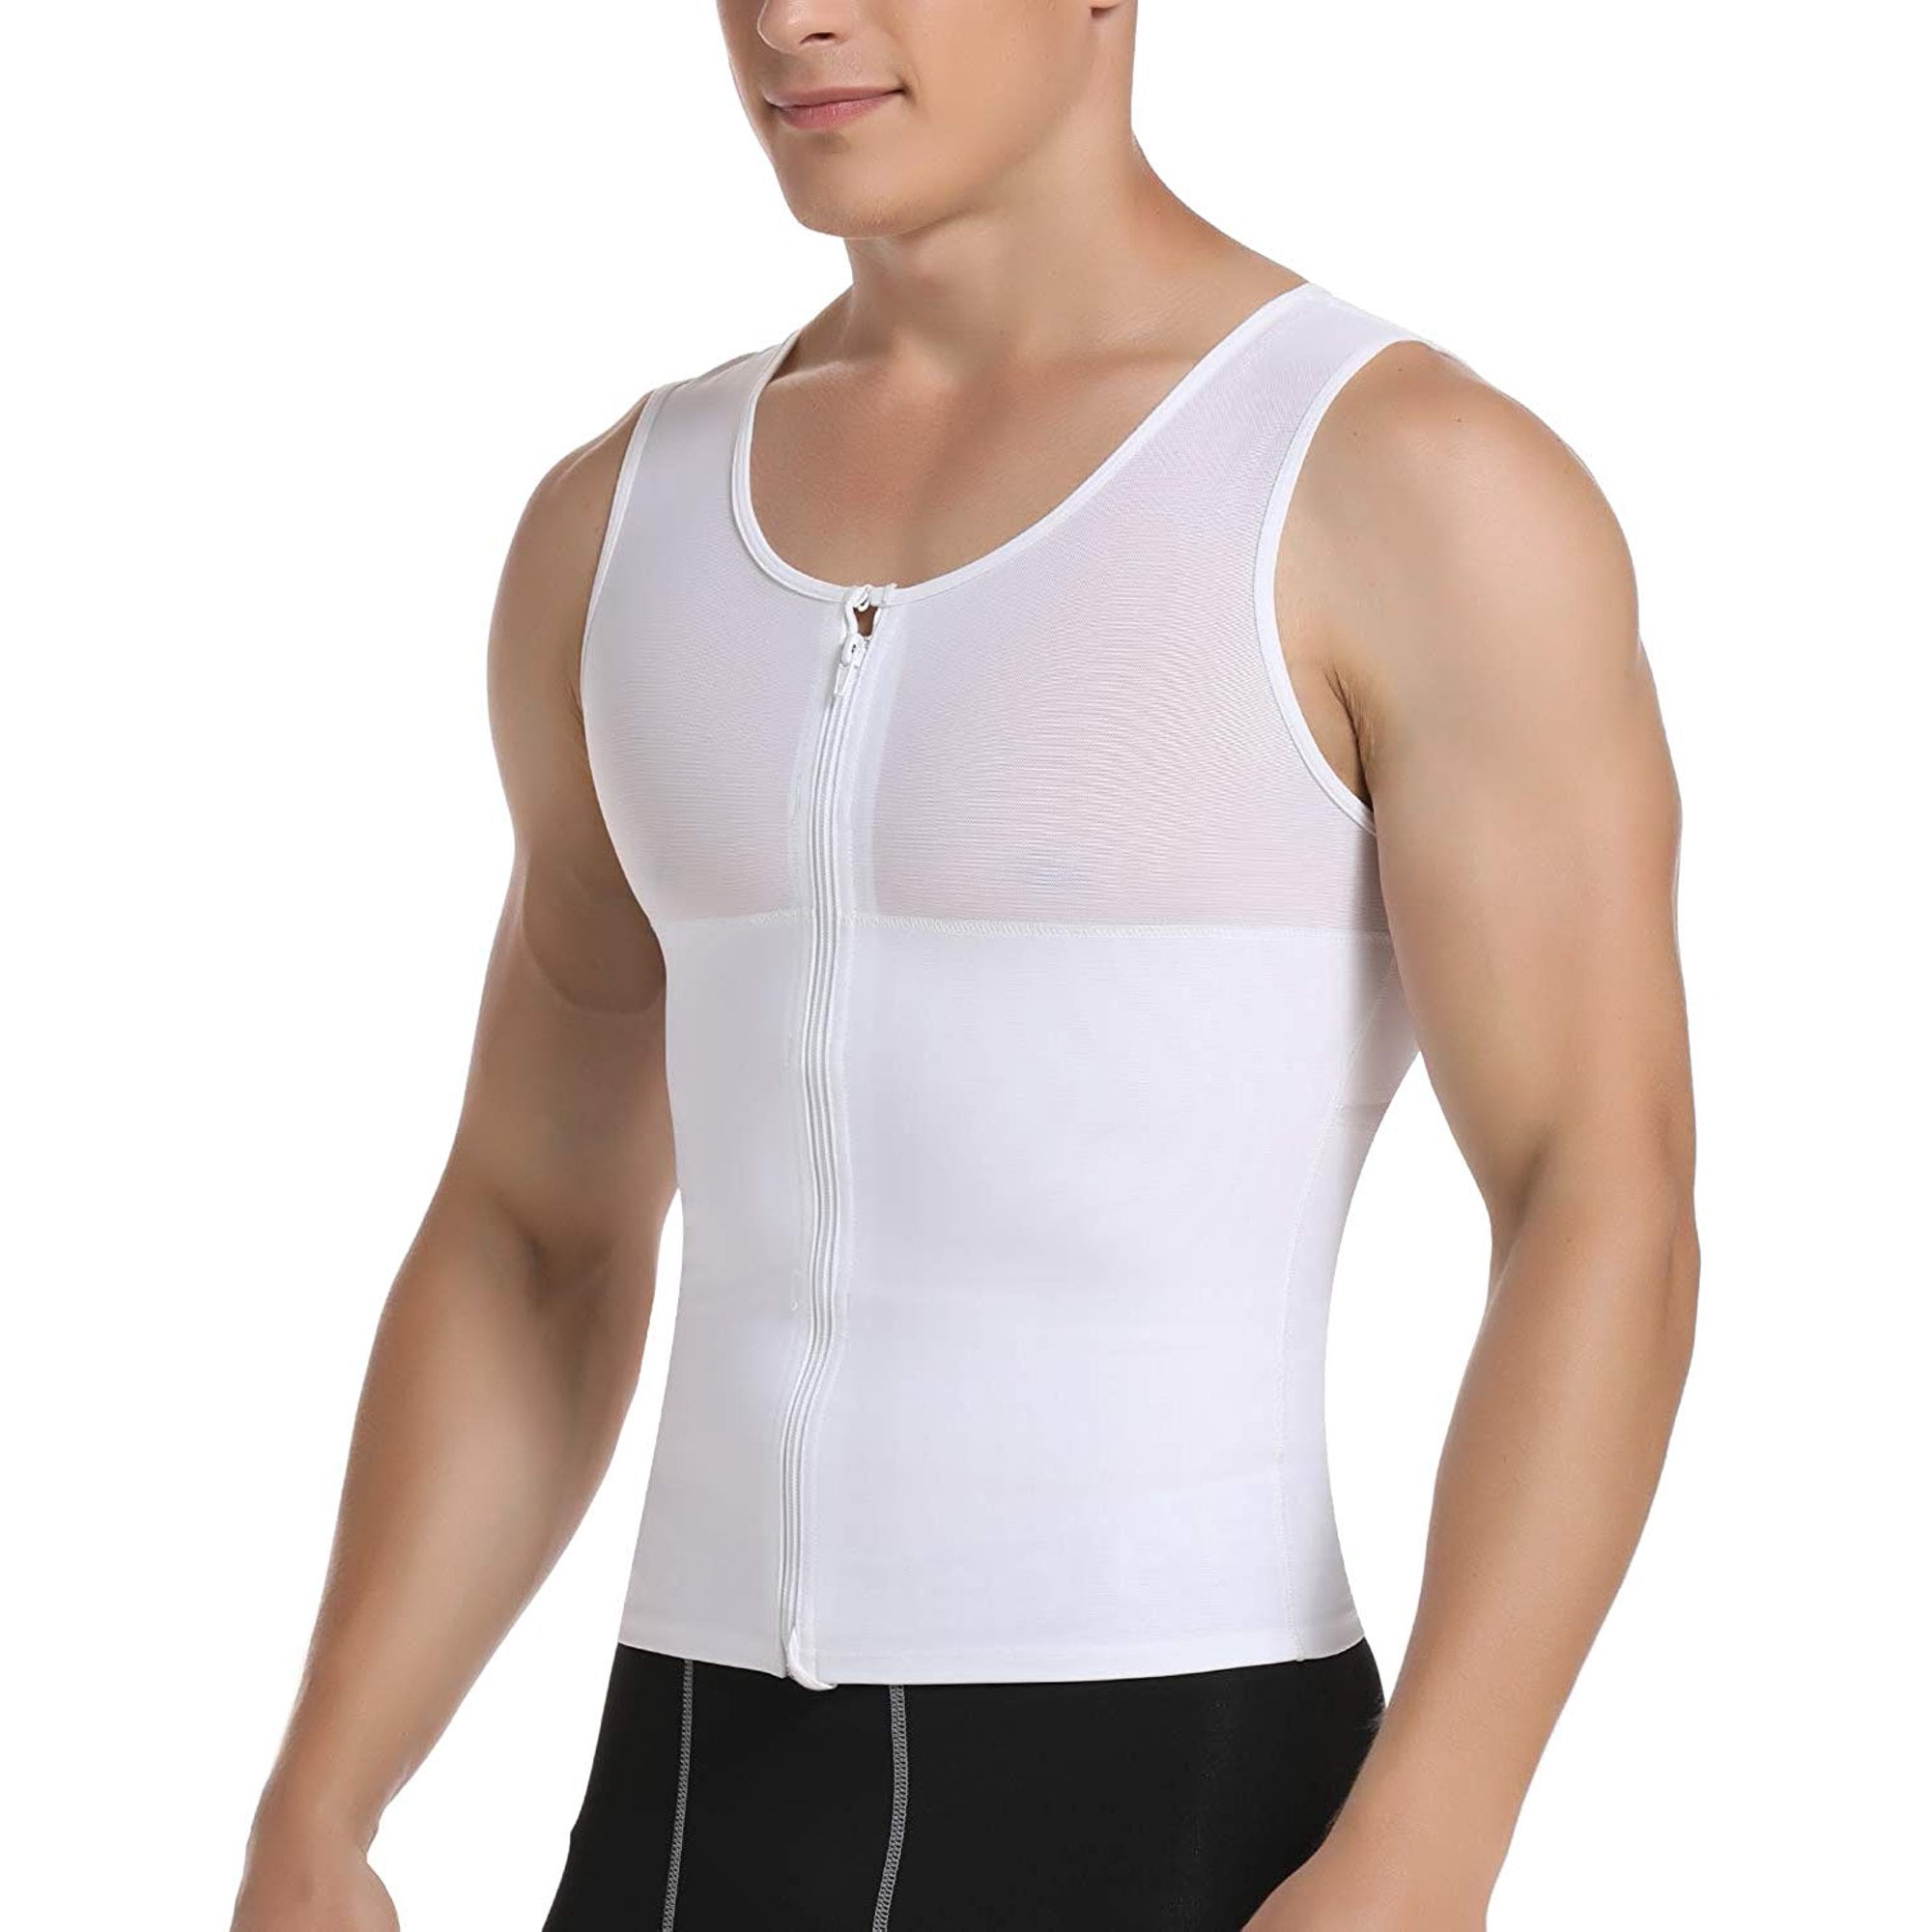 Shapewear & Fajas USA Girdle for men Seamless Compression Shirt Back Pain  Relief Firms up the Chest C